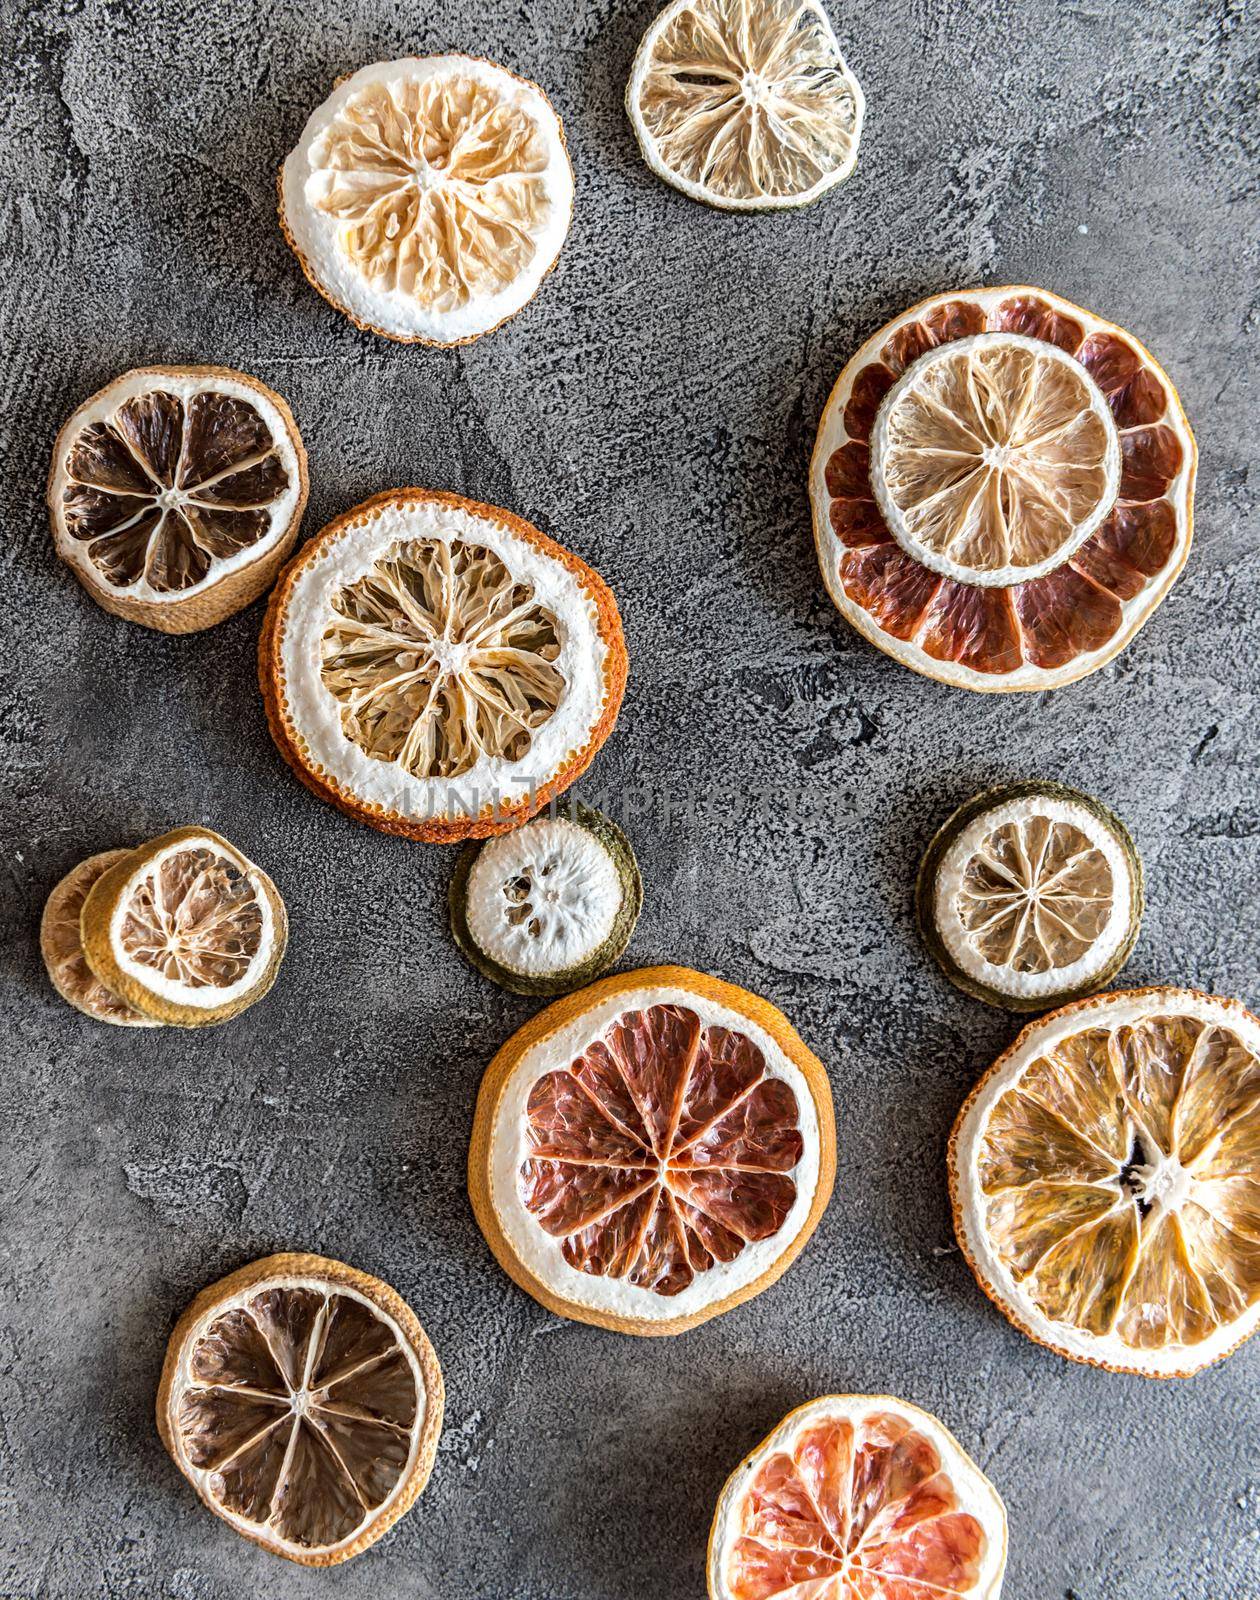 Pieces of dried oranges on a gray concrete background